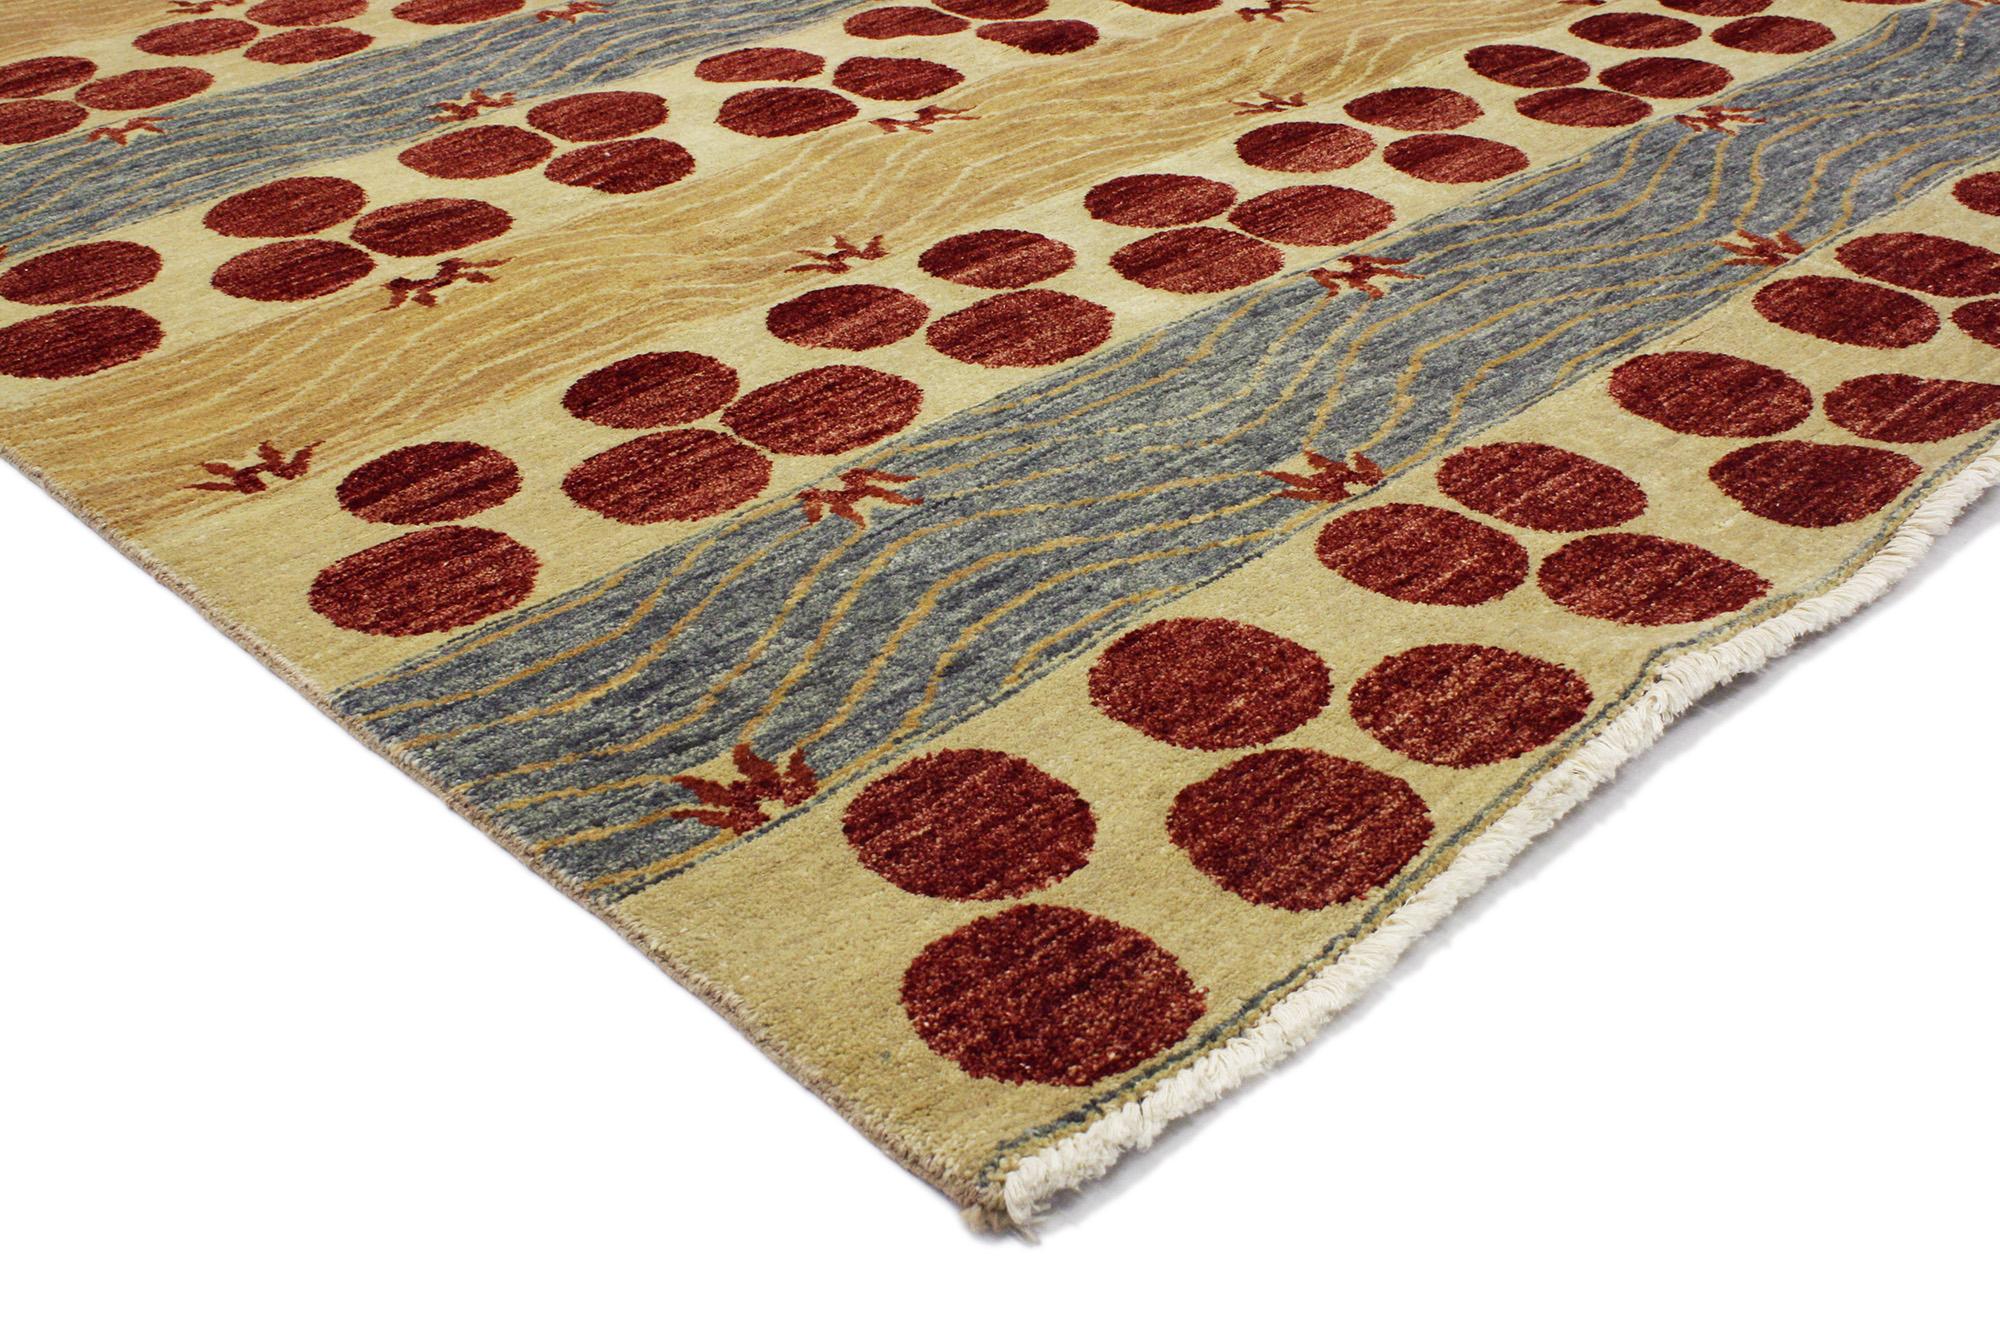 30289 Transitional Indian Area Rug, 05'09 X 09'03. This hand-knotted wool contemporary Indian area rug features a dynamic large-scale all-over Chintamani pattern in sumptuous warm colors. The classic Chintamani motif, which consists of three disks